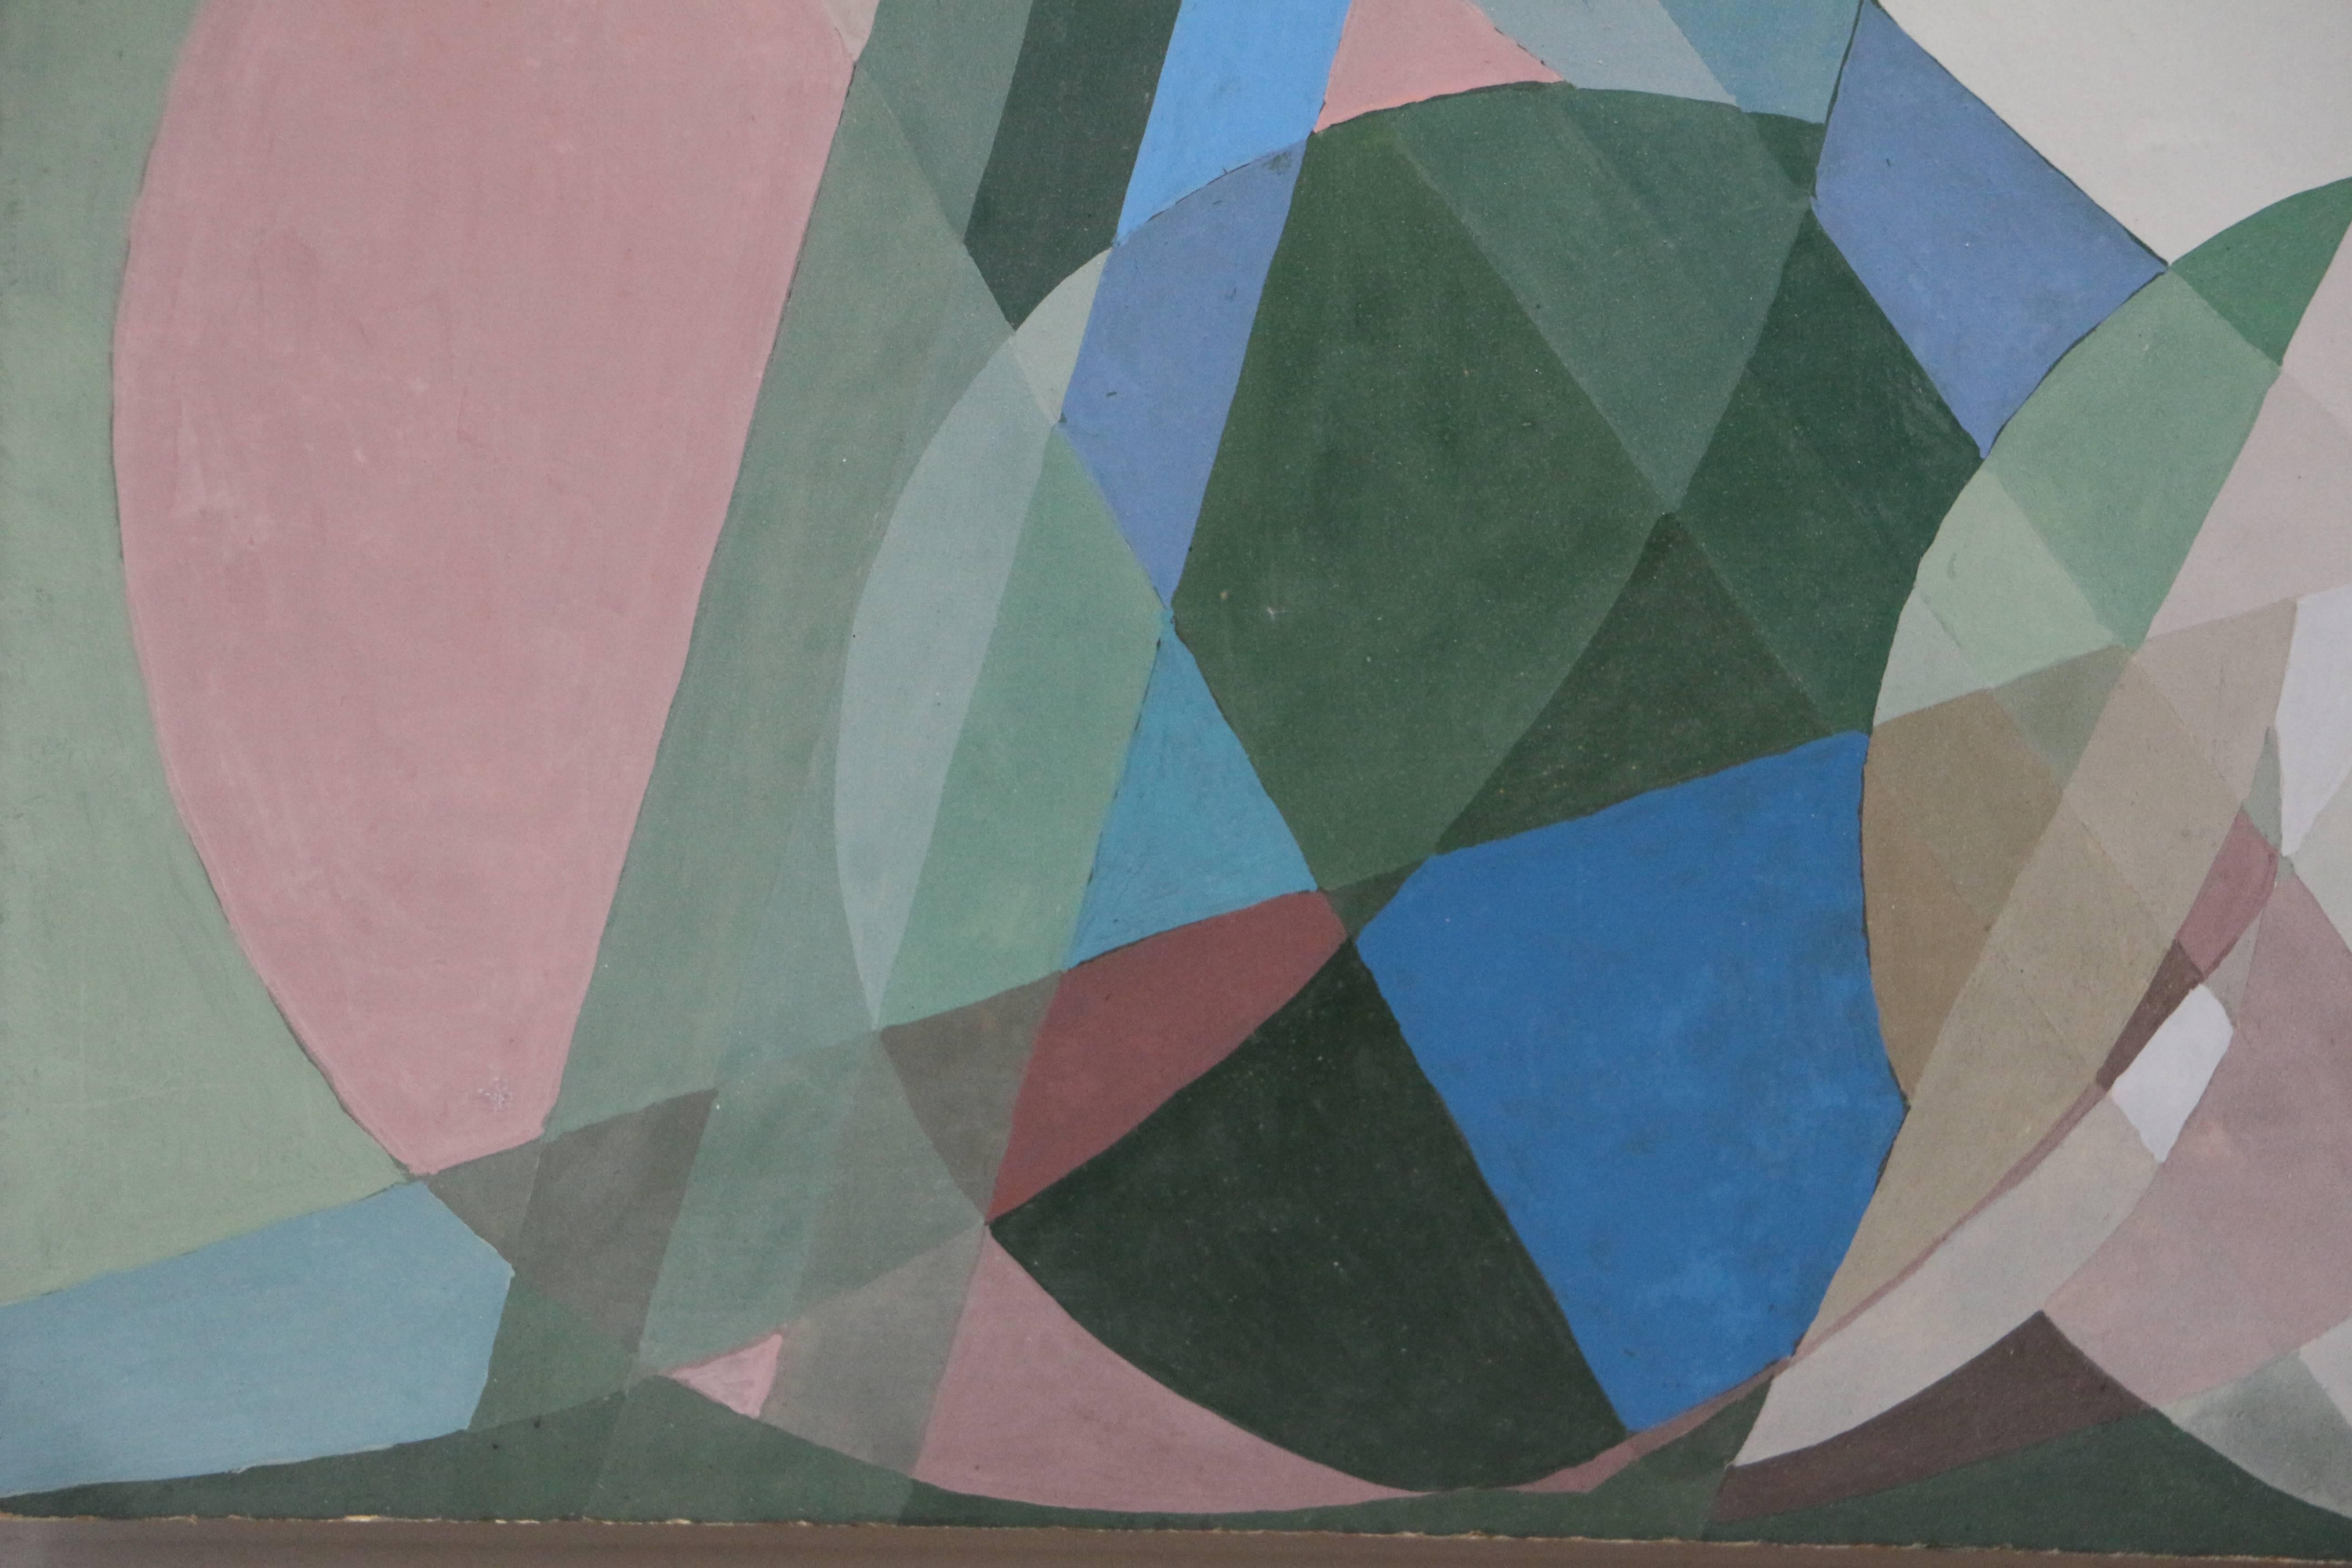 This original oil and tempera composition uses multiple bright and pastel colors in various geometric shapes to create an overall geometric abstract work. 

Argentinian painter Anita Payró (1897-1980) was heavily influenced by her artistic family